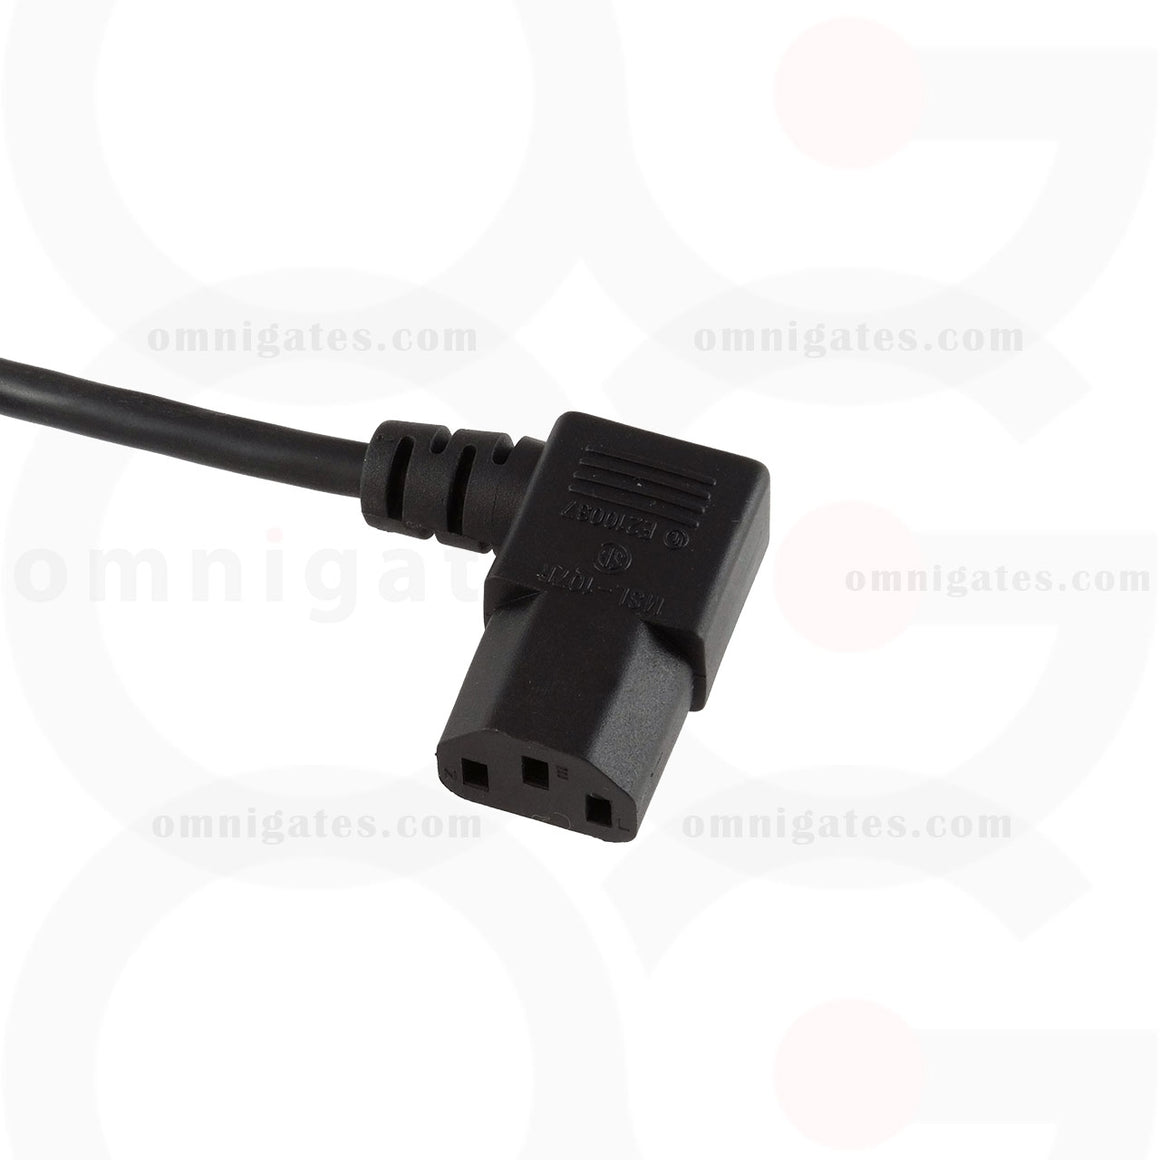 Right-Angle Standard AC Power PC/Monitor Cord, 18AWG 3 Conductor, 10A 125V, NEMA5-15P/C13 Connector Cable female